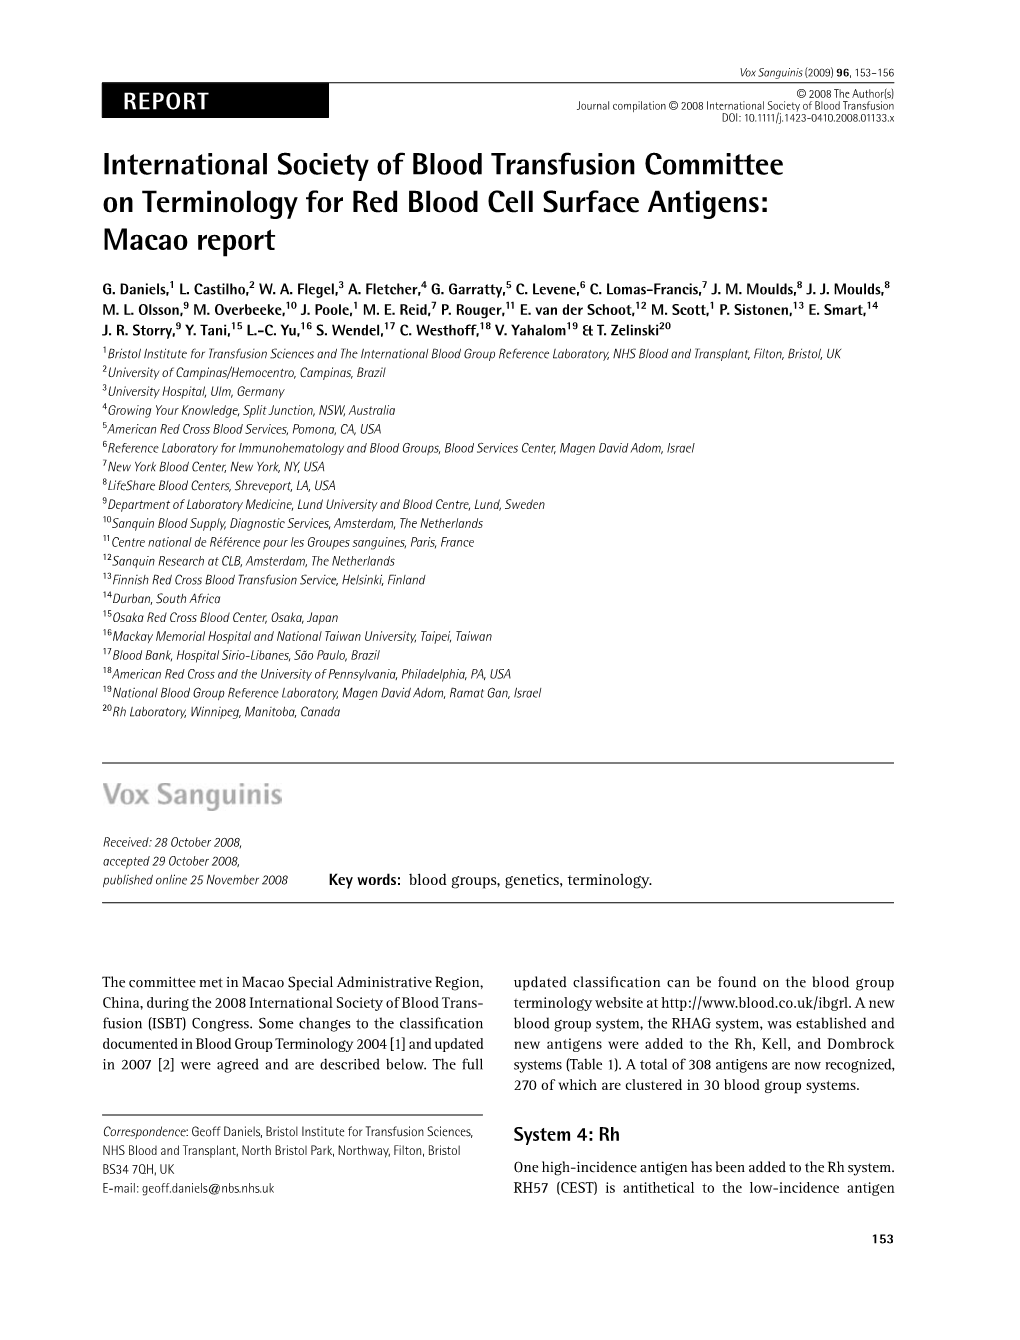 Vox Sanguinis Red Cell Surface Antigen Terminology 2009 Macao.Pdf